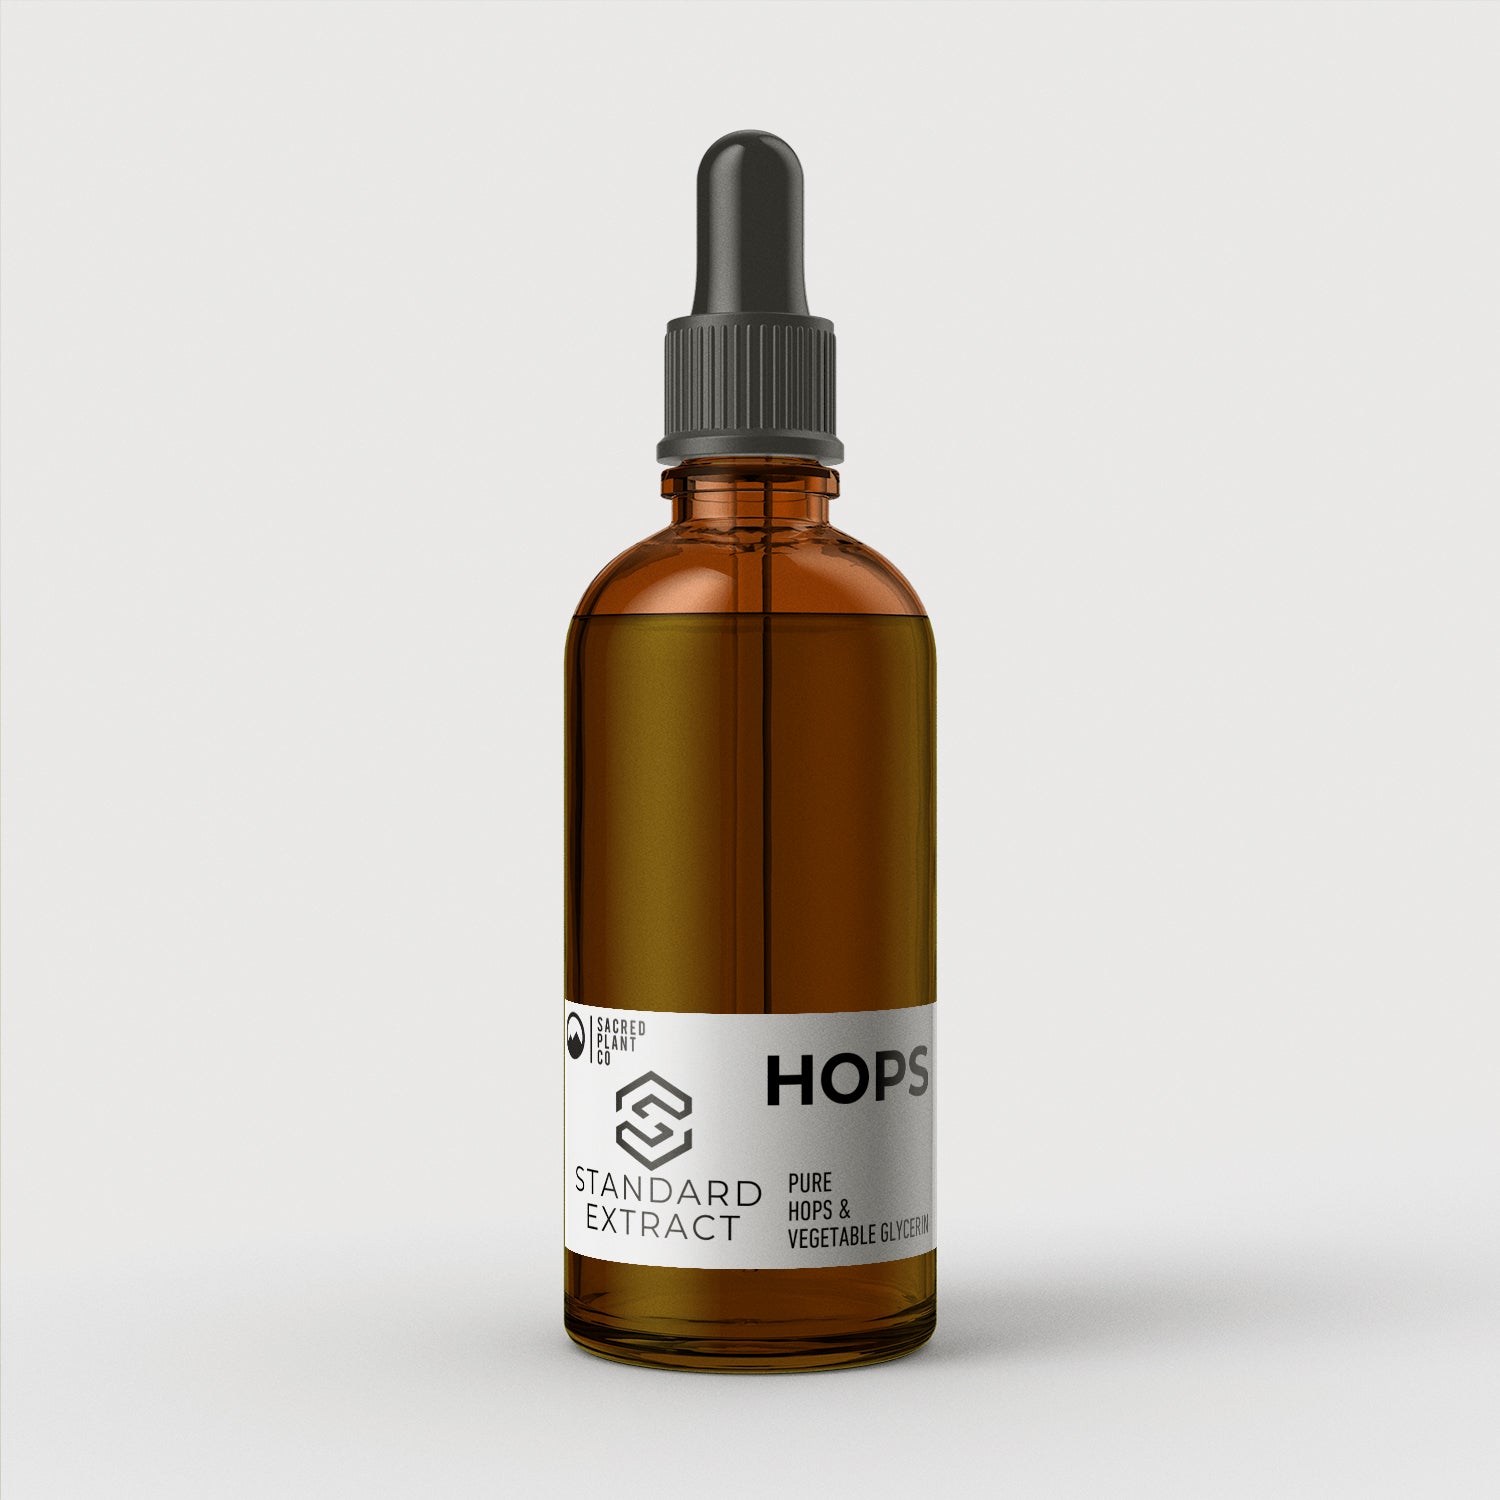 Standard Extract Hops Tincture in a large amber bottle from Sacred Plant Co, containing pure hops extract for natural relaxation.